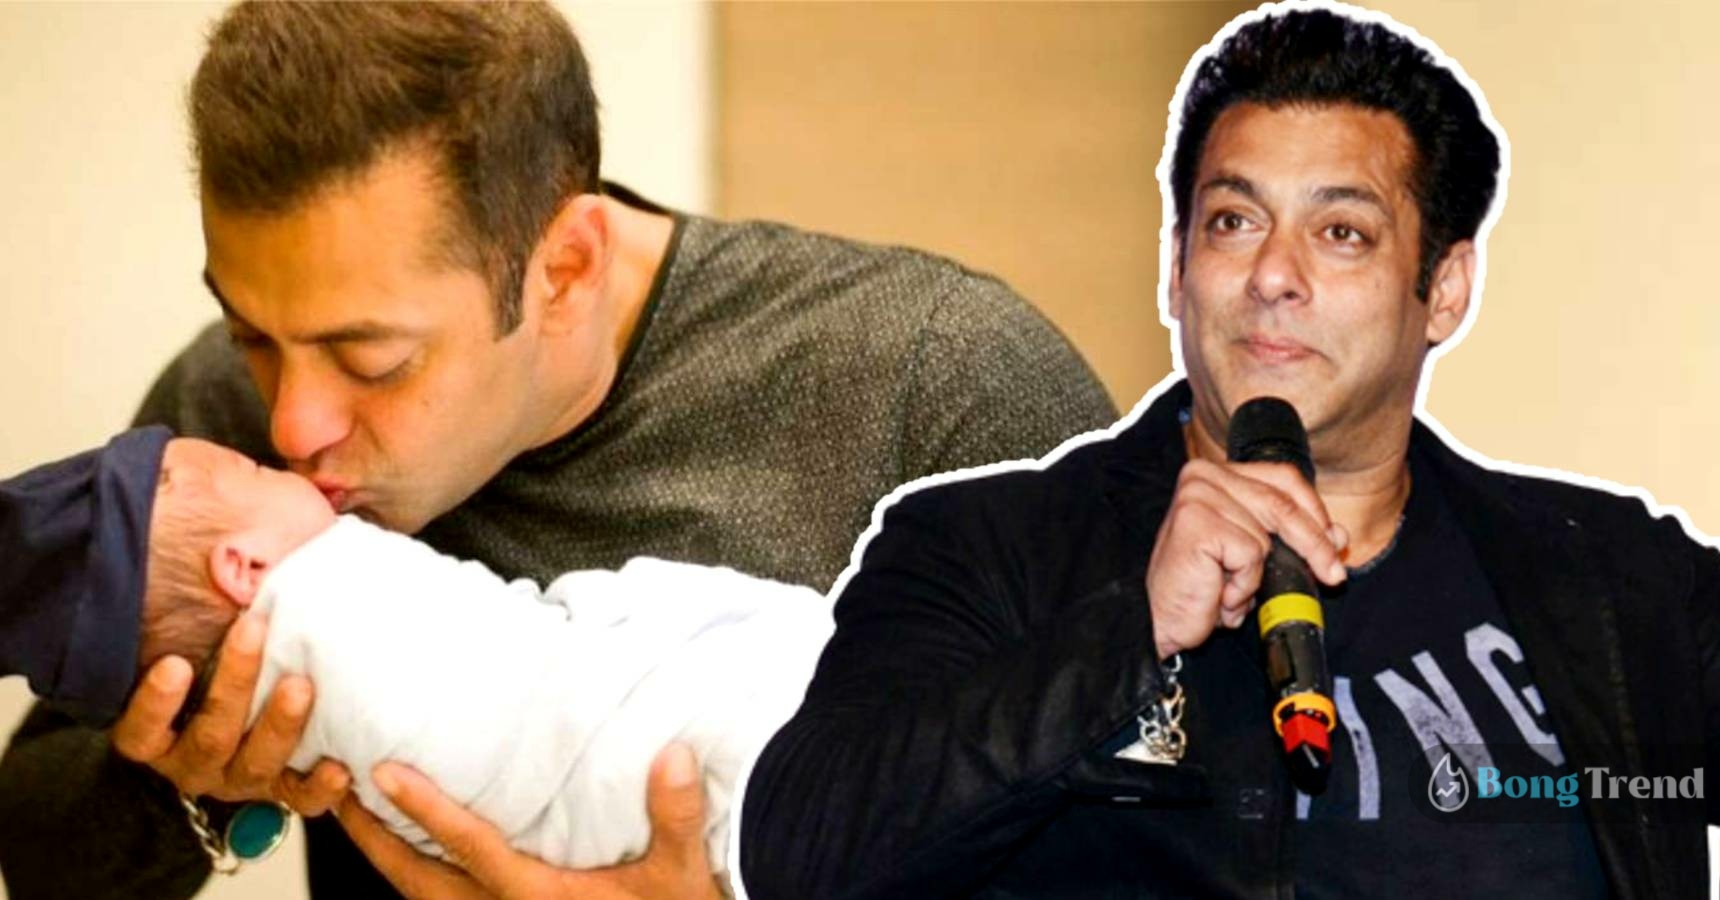 Bollywood superstar Salman Khan reveals he wants to have kids, but doesn’t want the mother